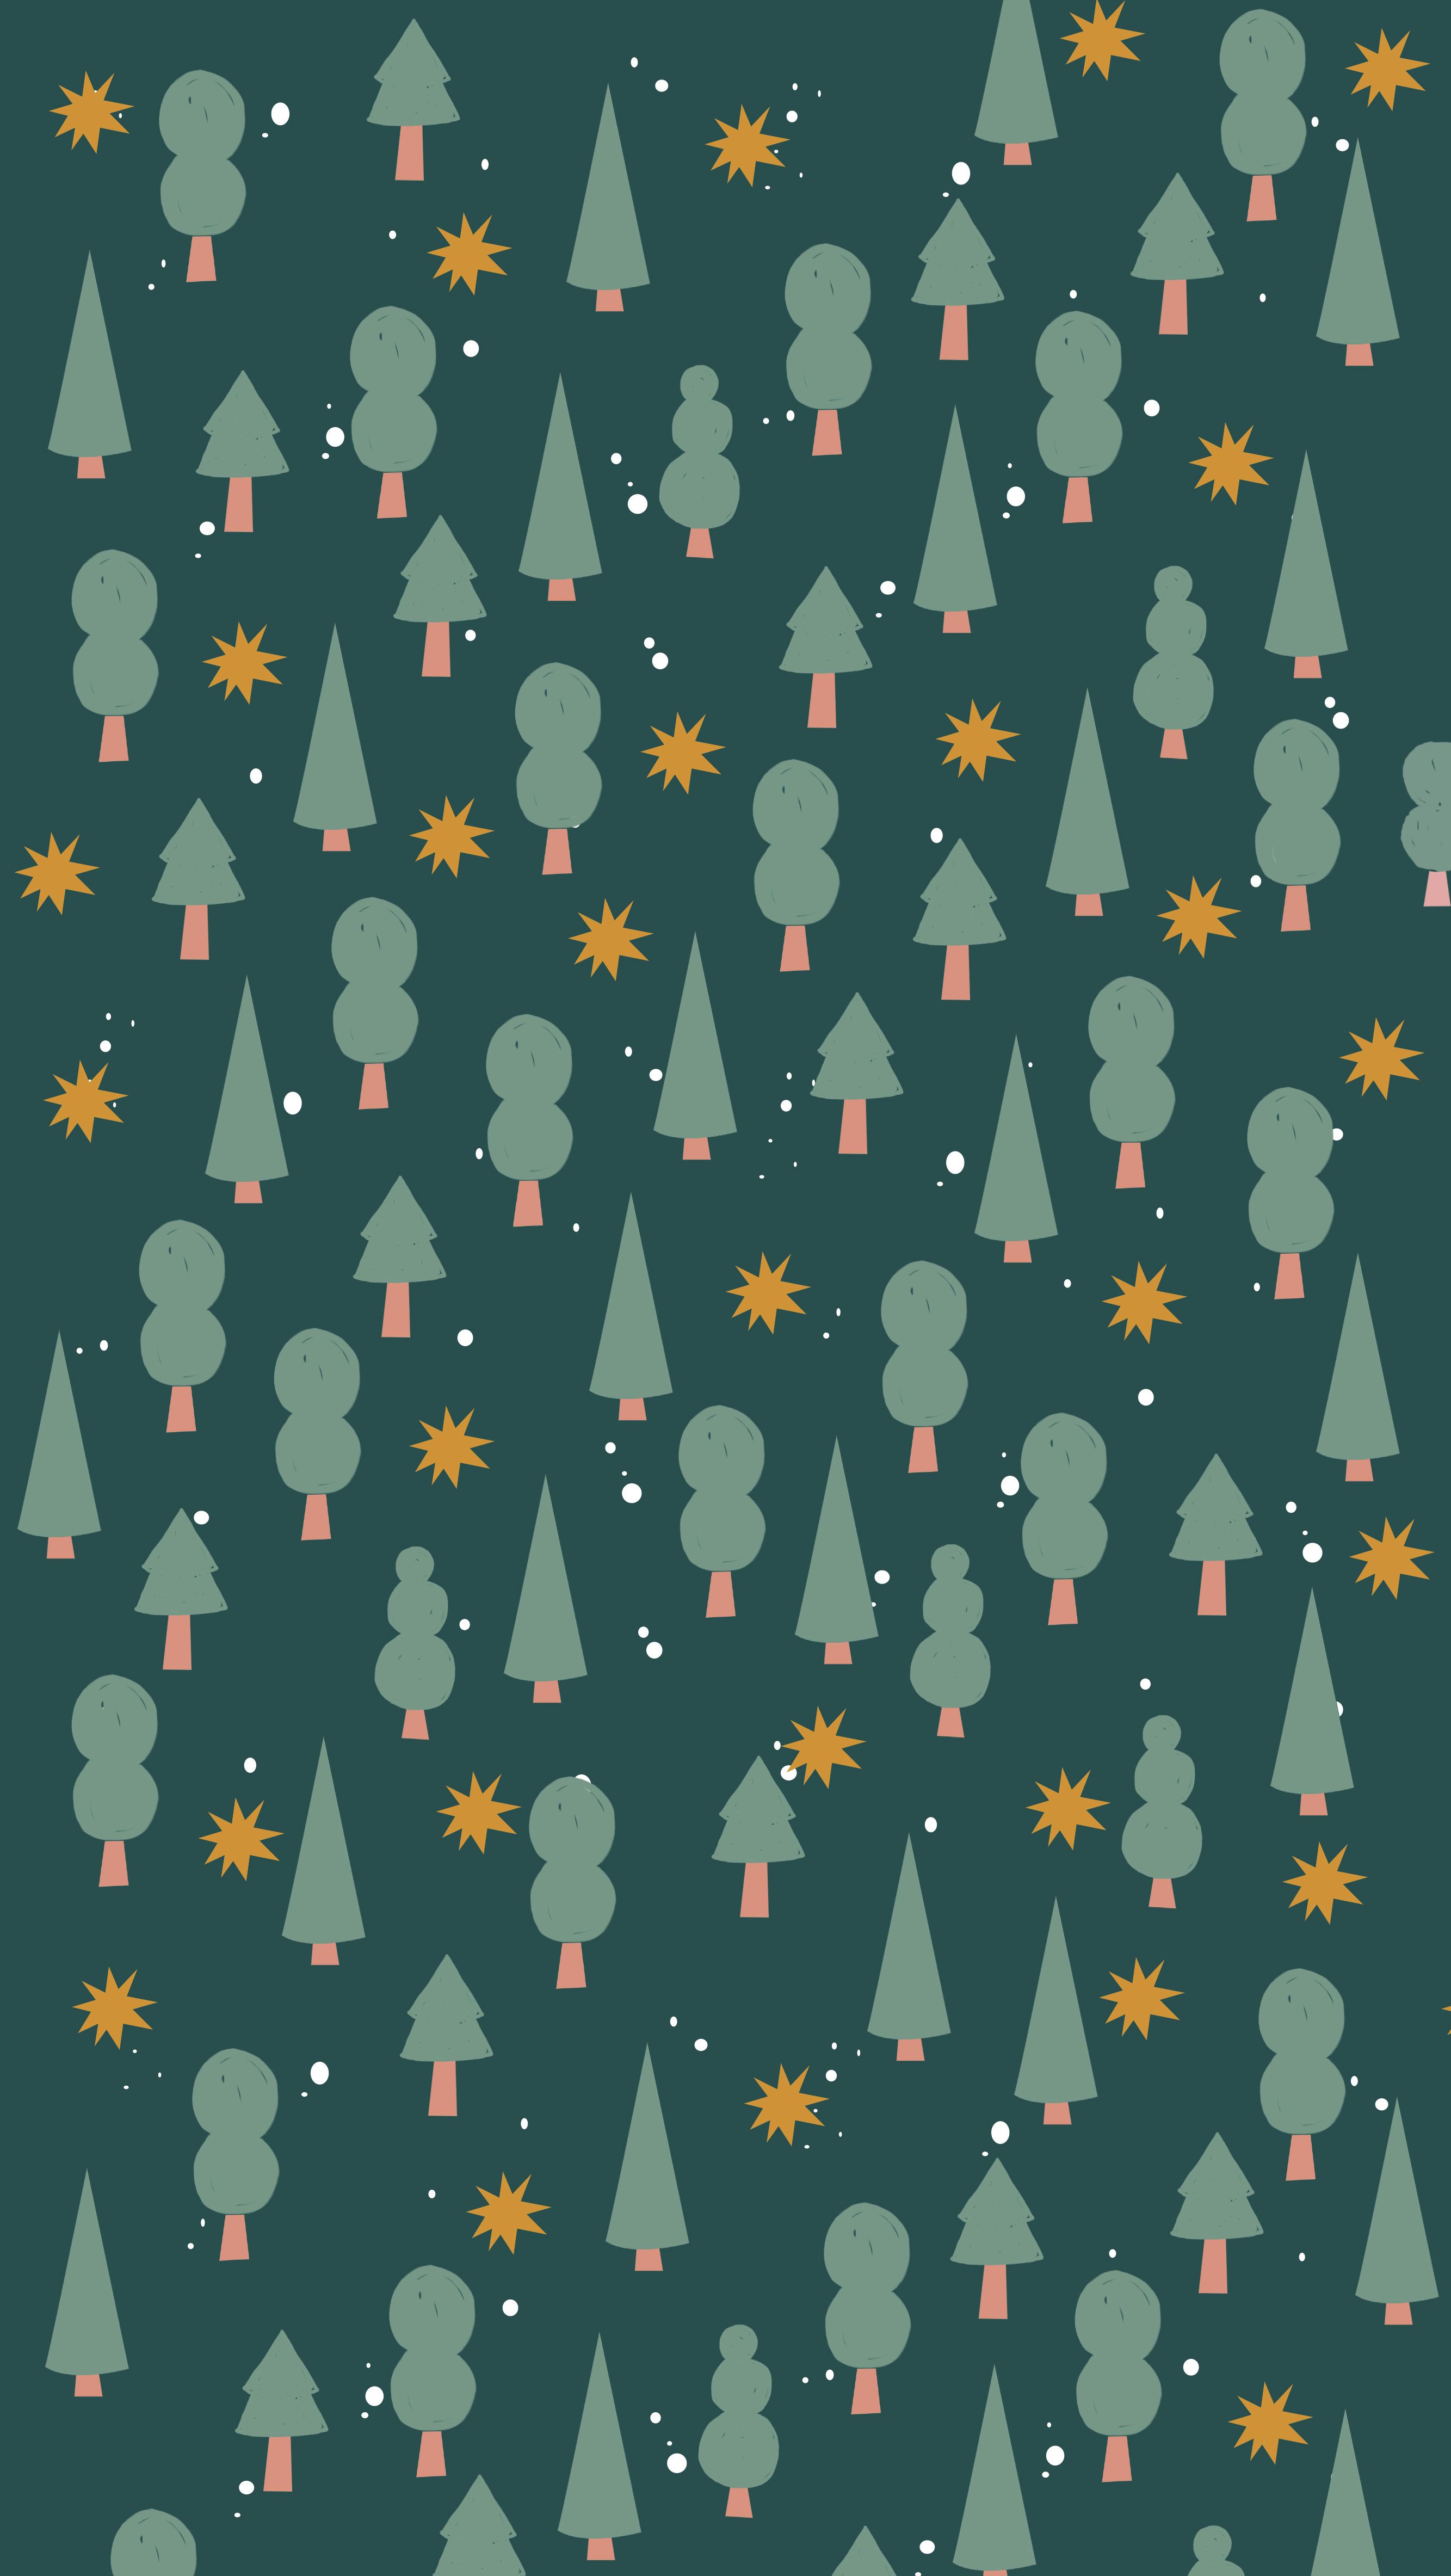 Christmas Wallpaper Backgrounds posted by Michelle Thompson